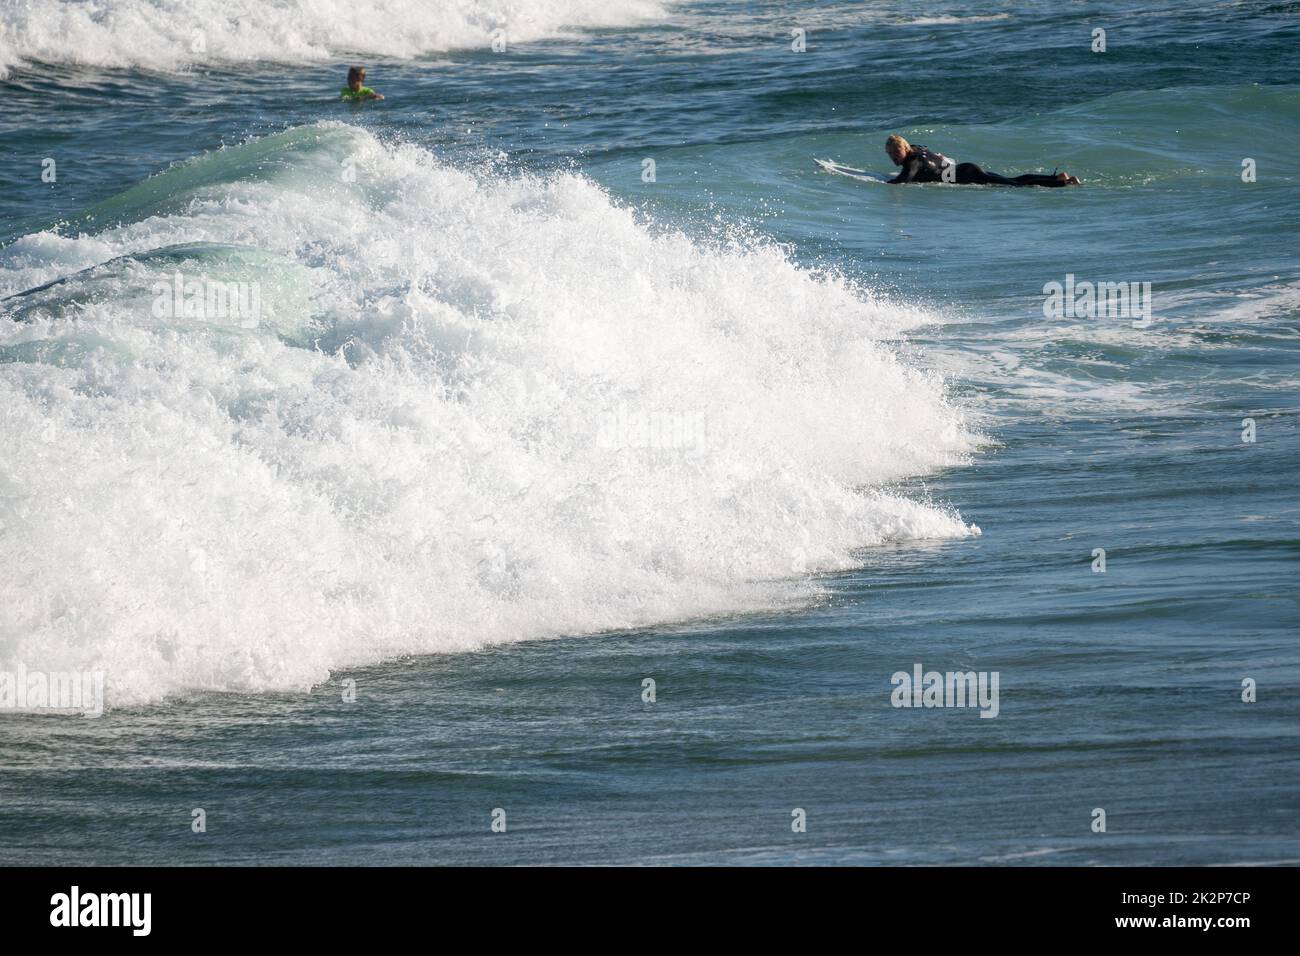 The large waves near Maroubra Beach and surfers on the water Stock Photo